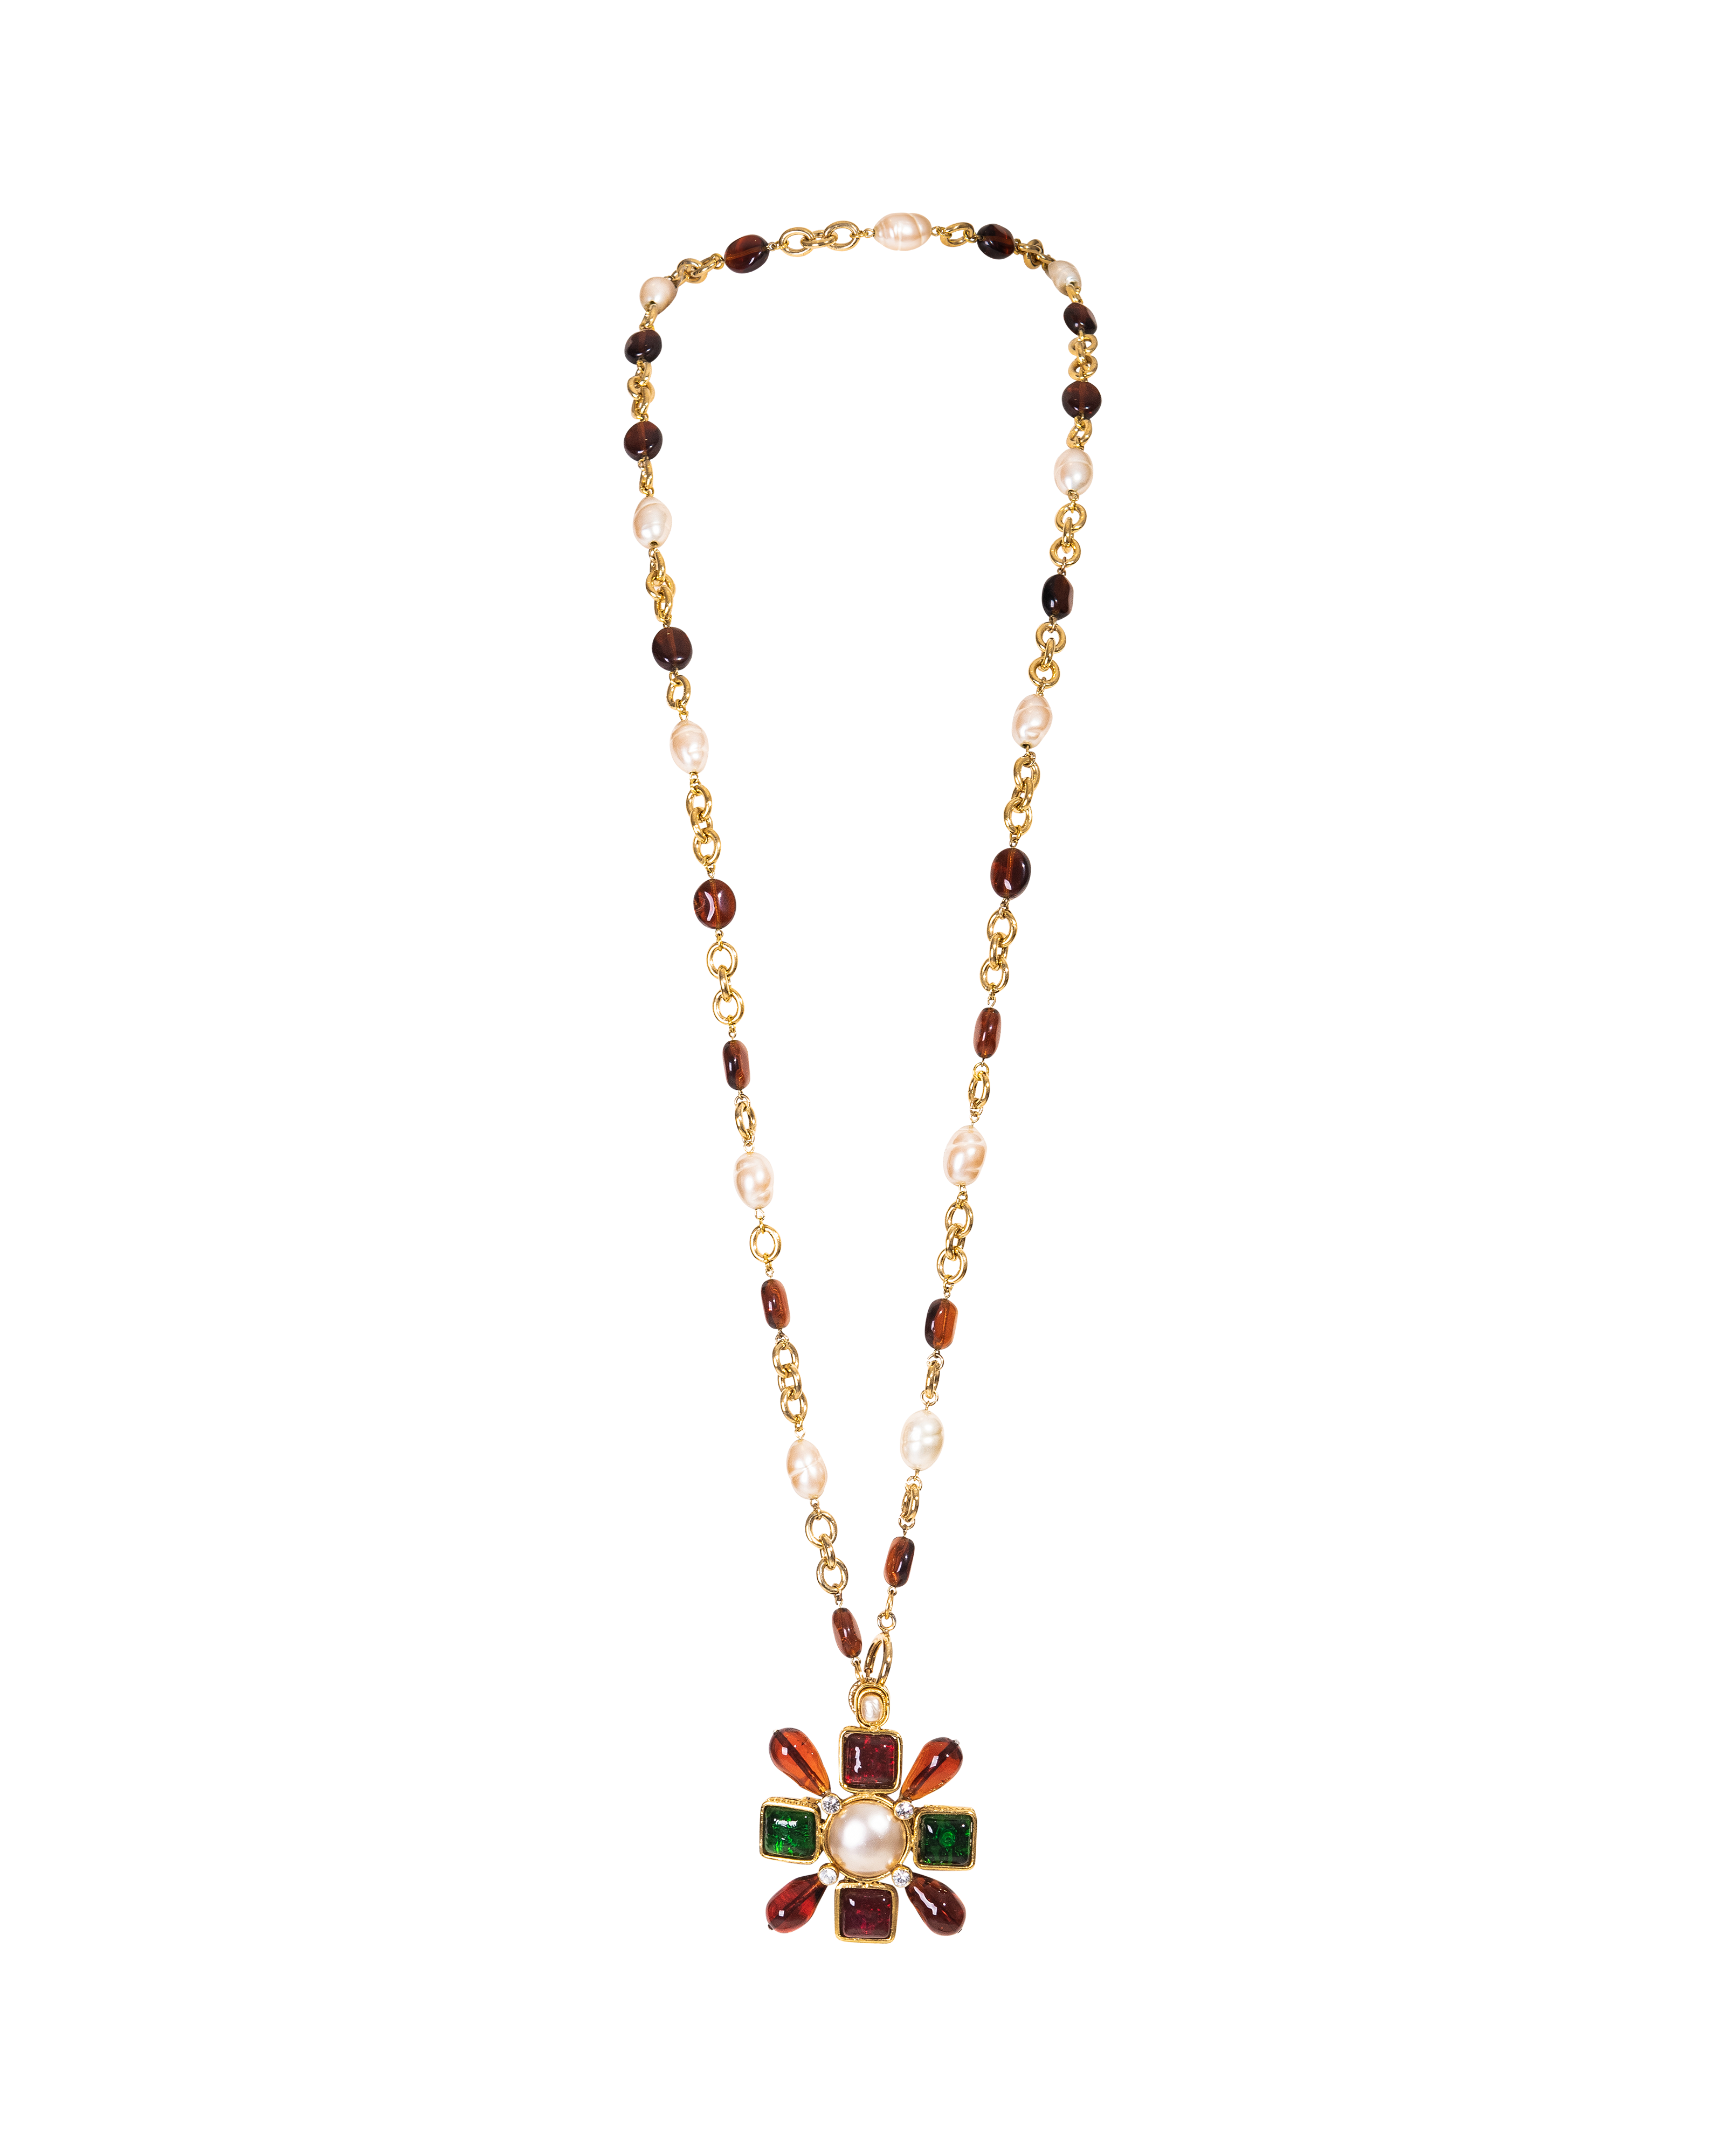 1987 Gold Necklace with Cabochon Stones